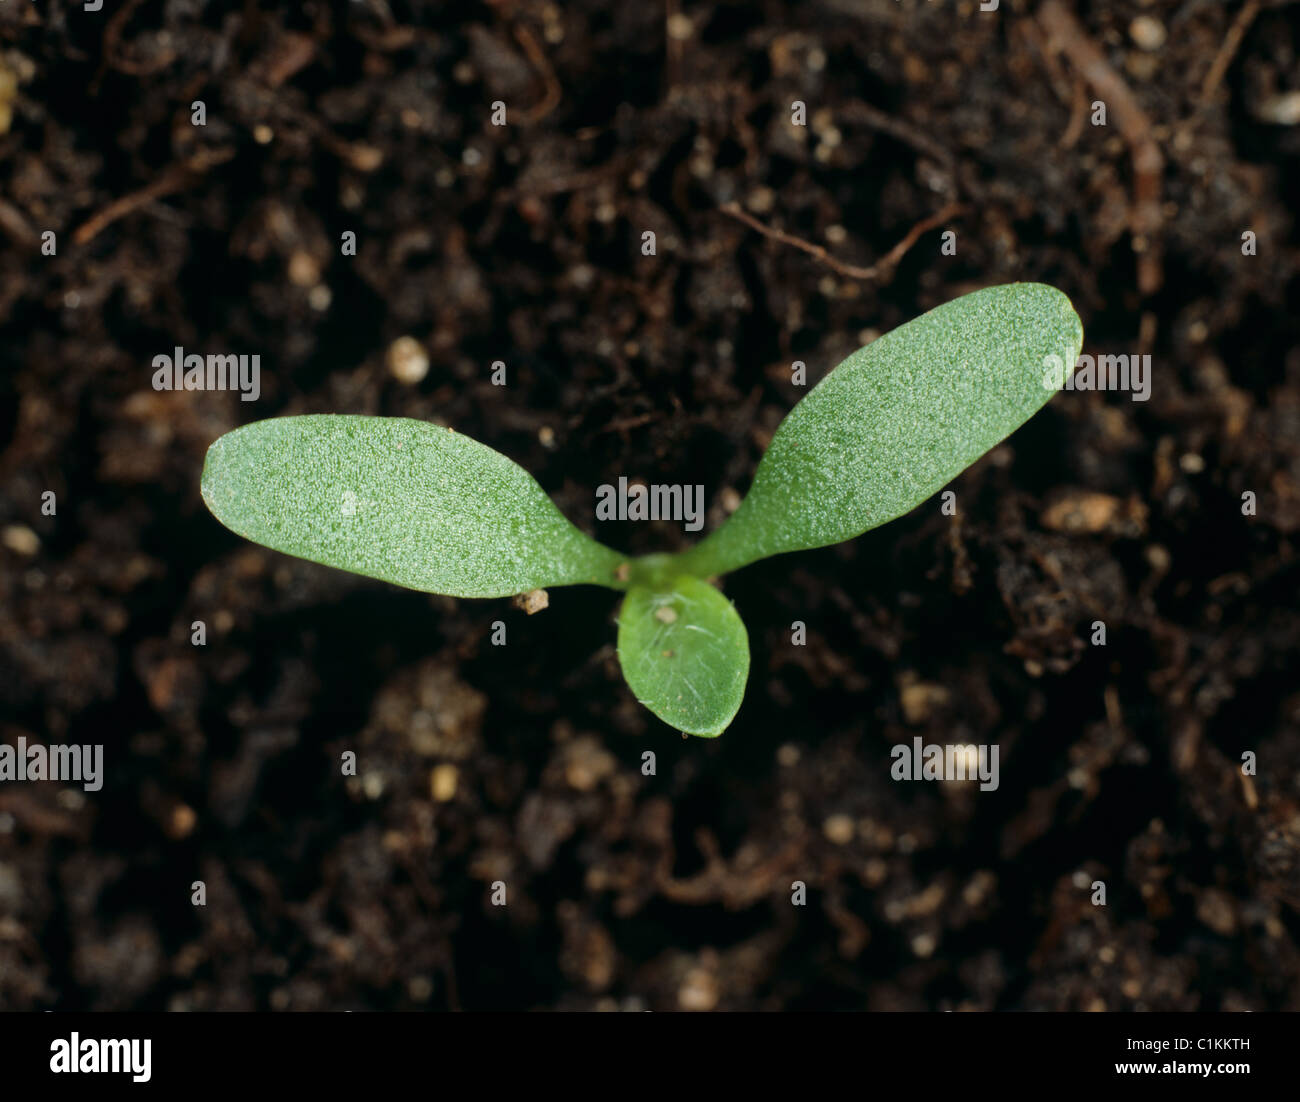 Greater plantain (Plantago major) seedling with cotyledons and first true leaf forming Stock Photo